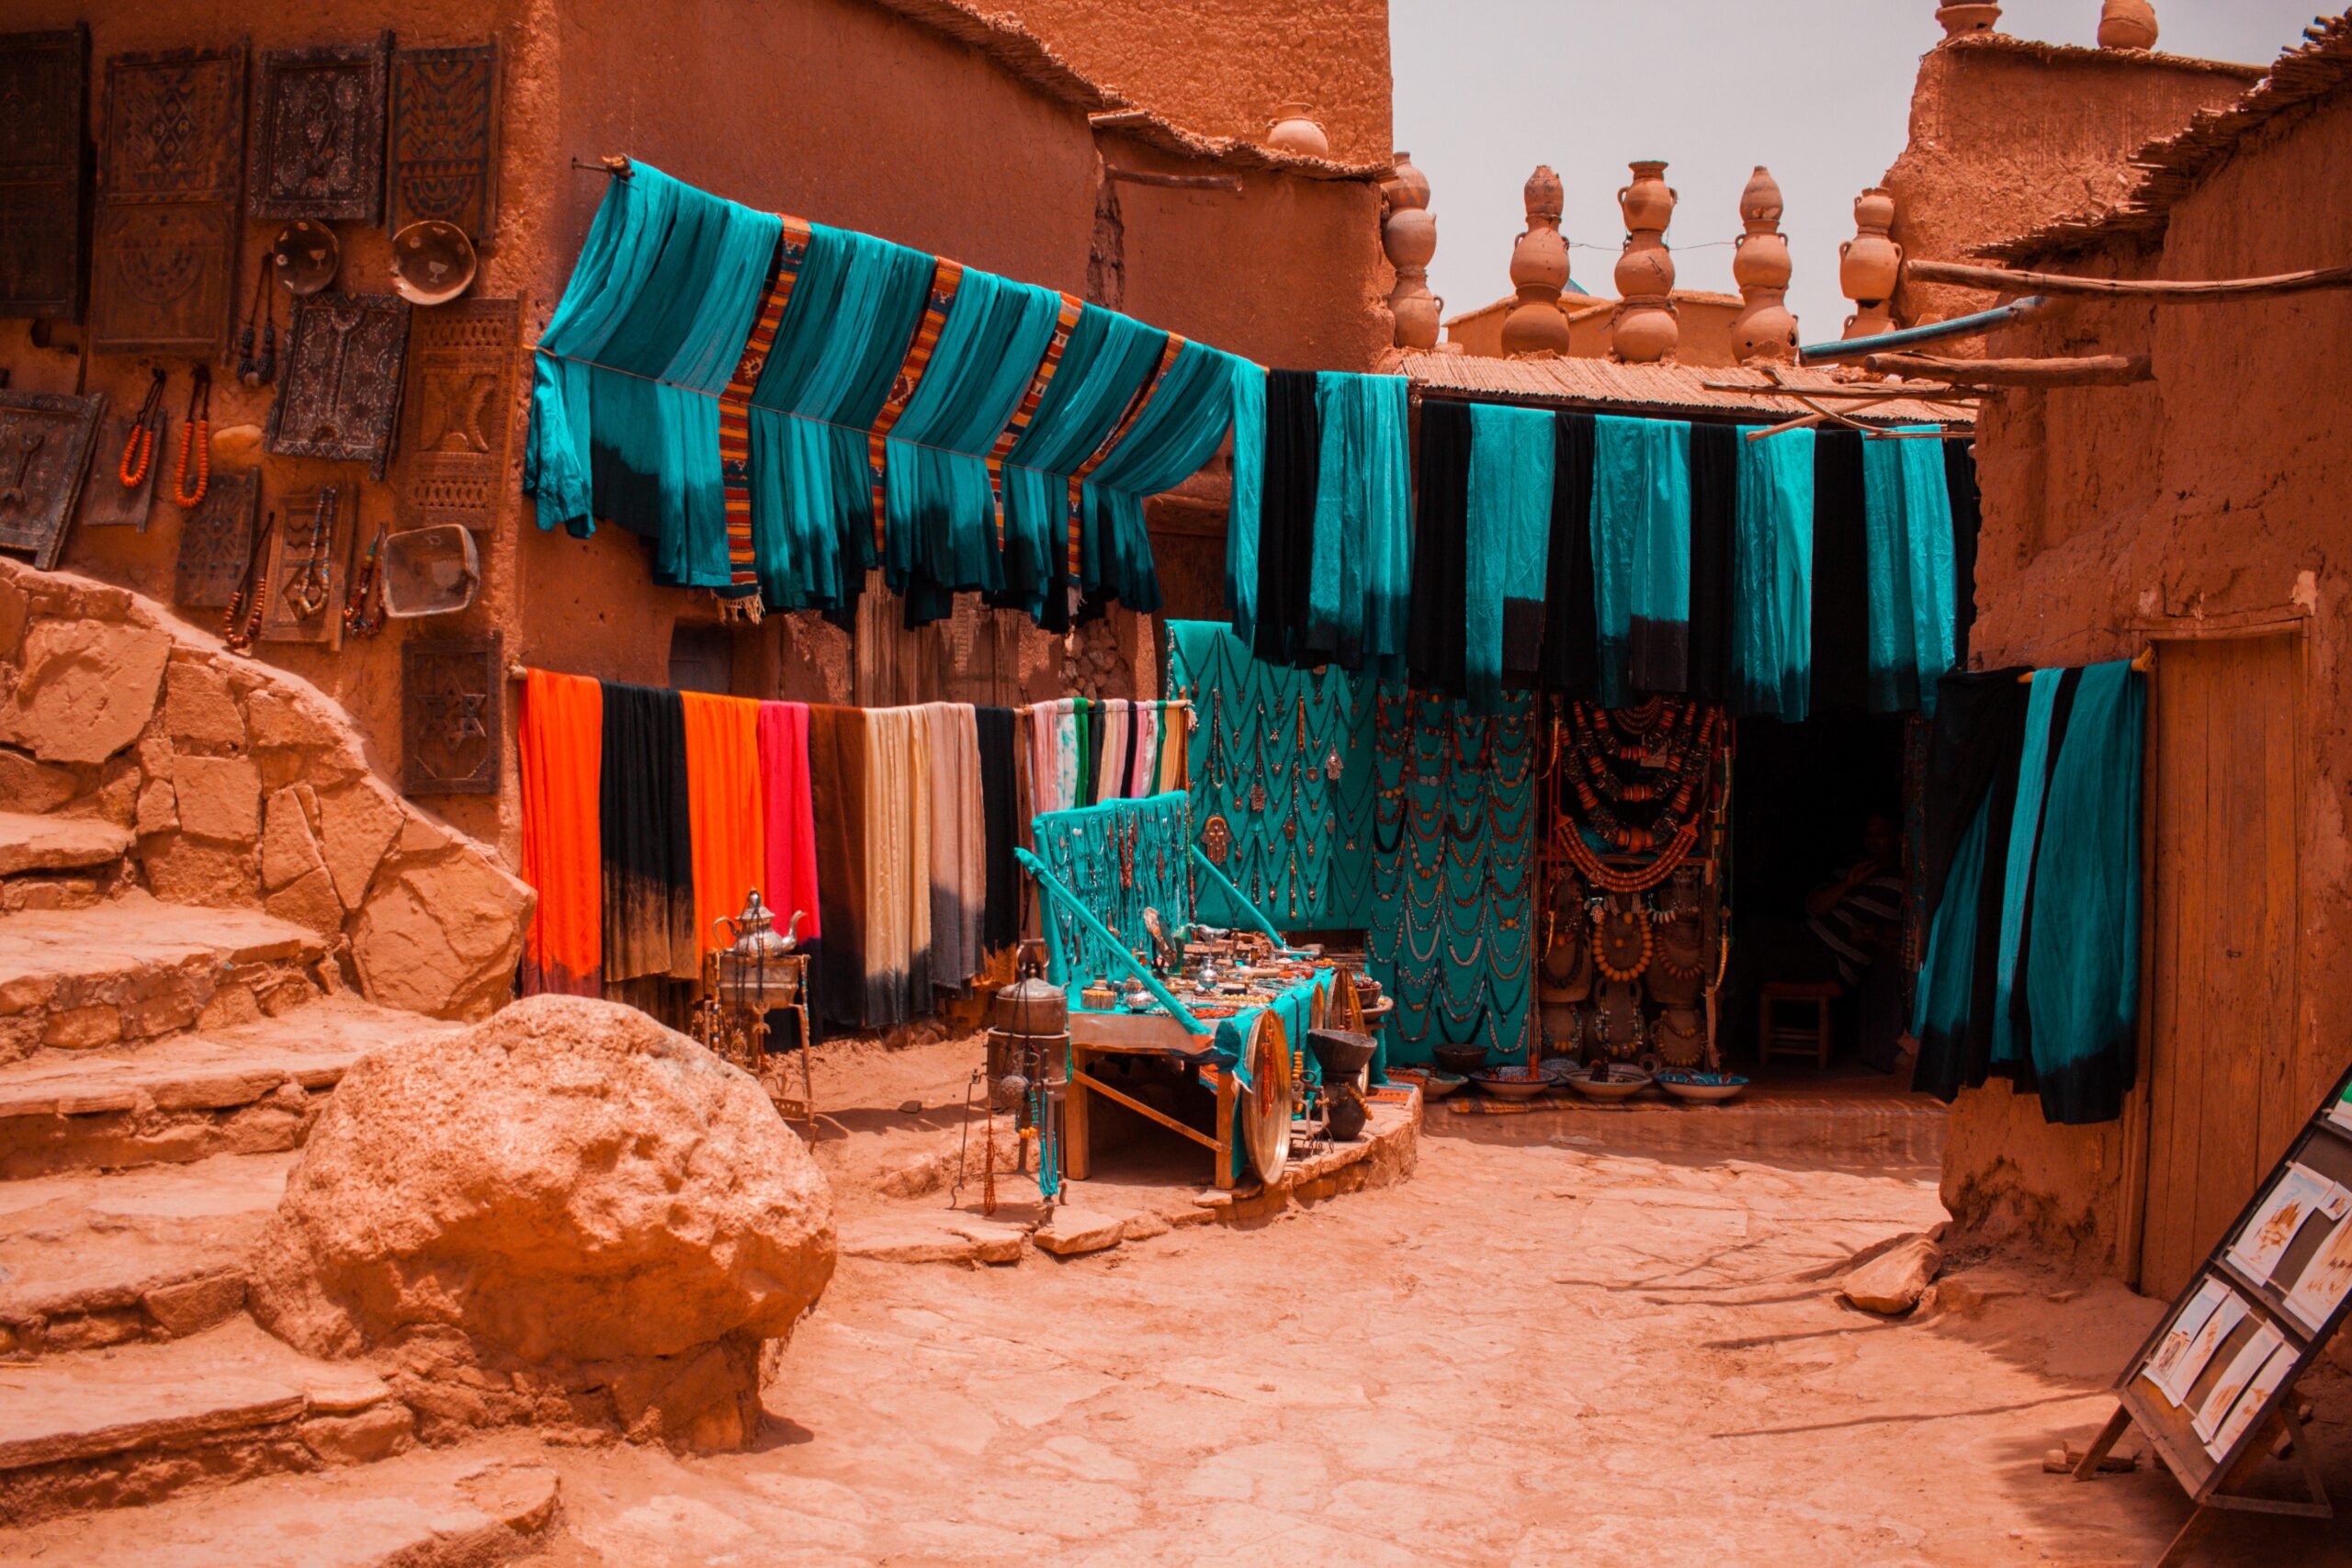 Colourful fabrics in morocco against earthy tones